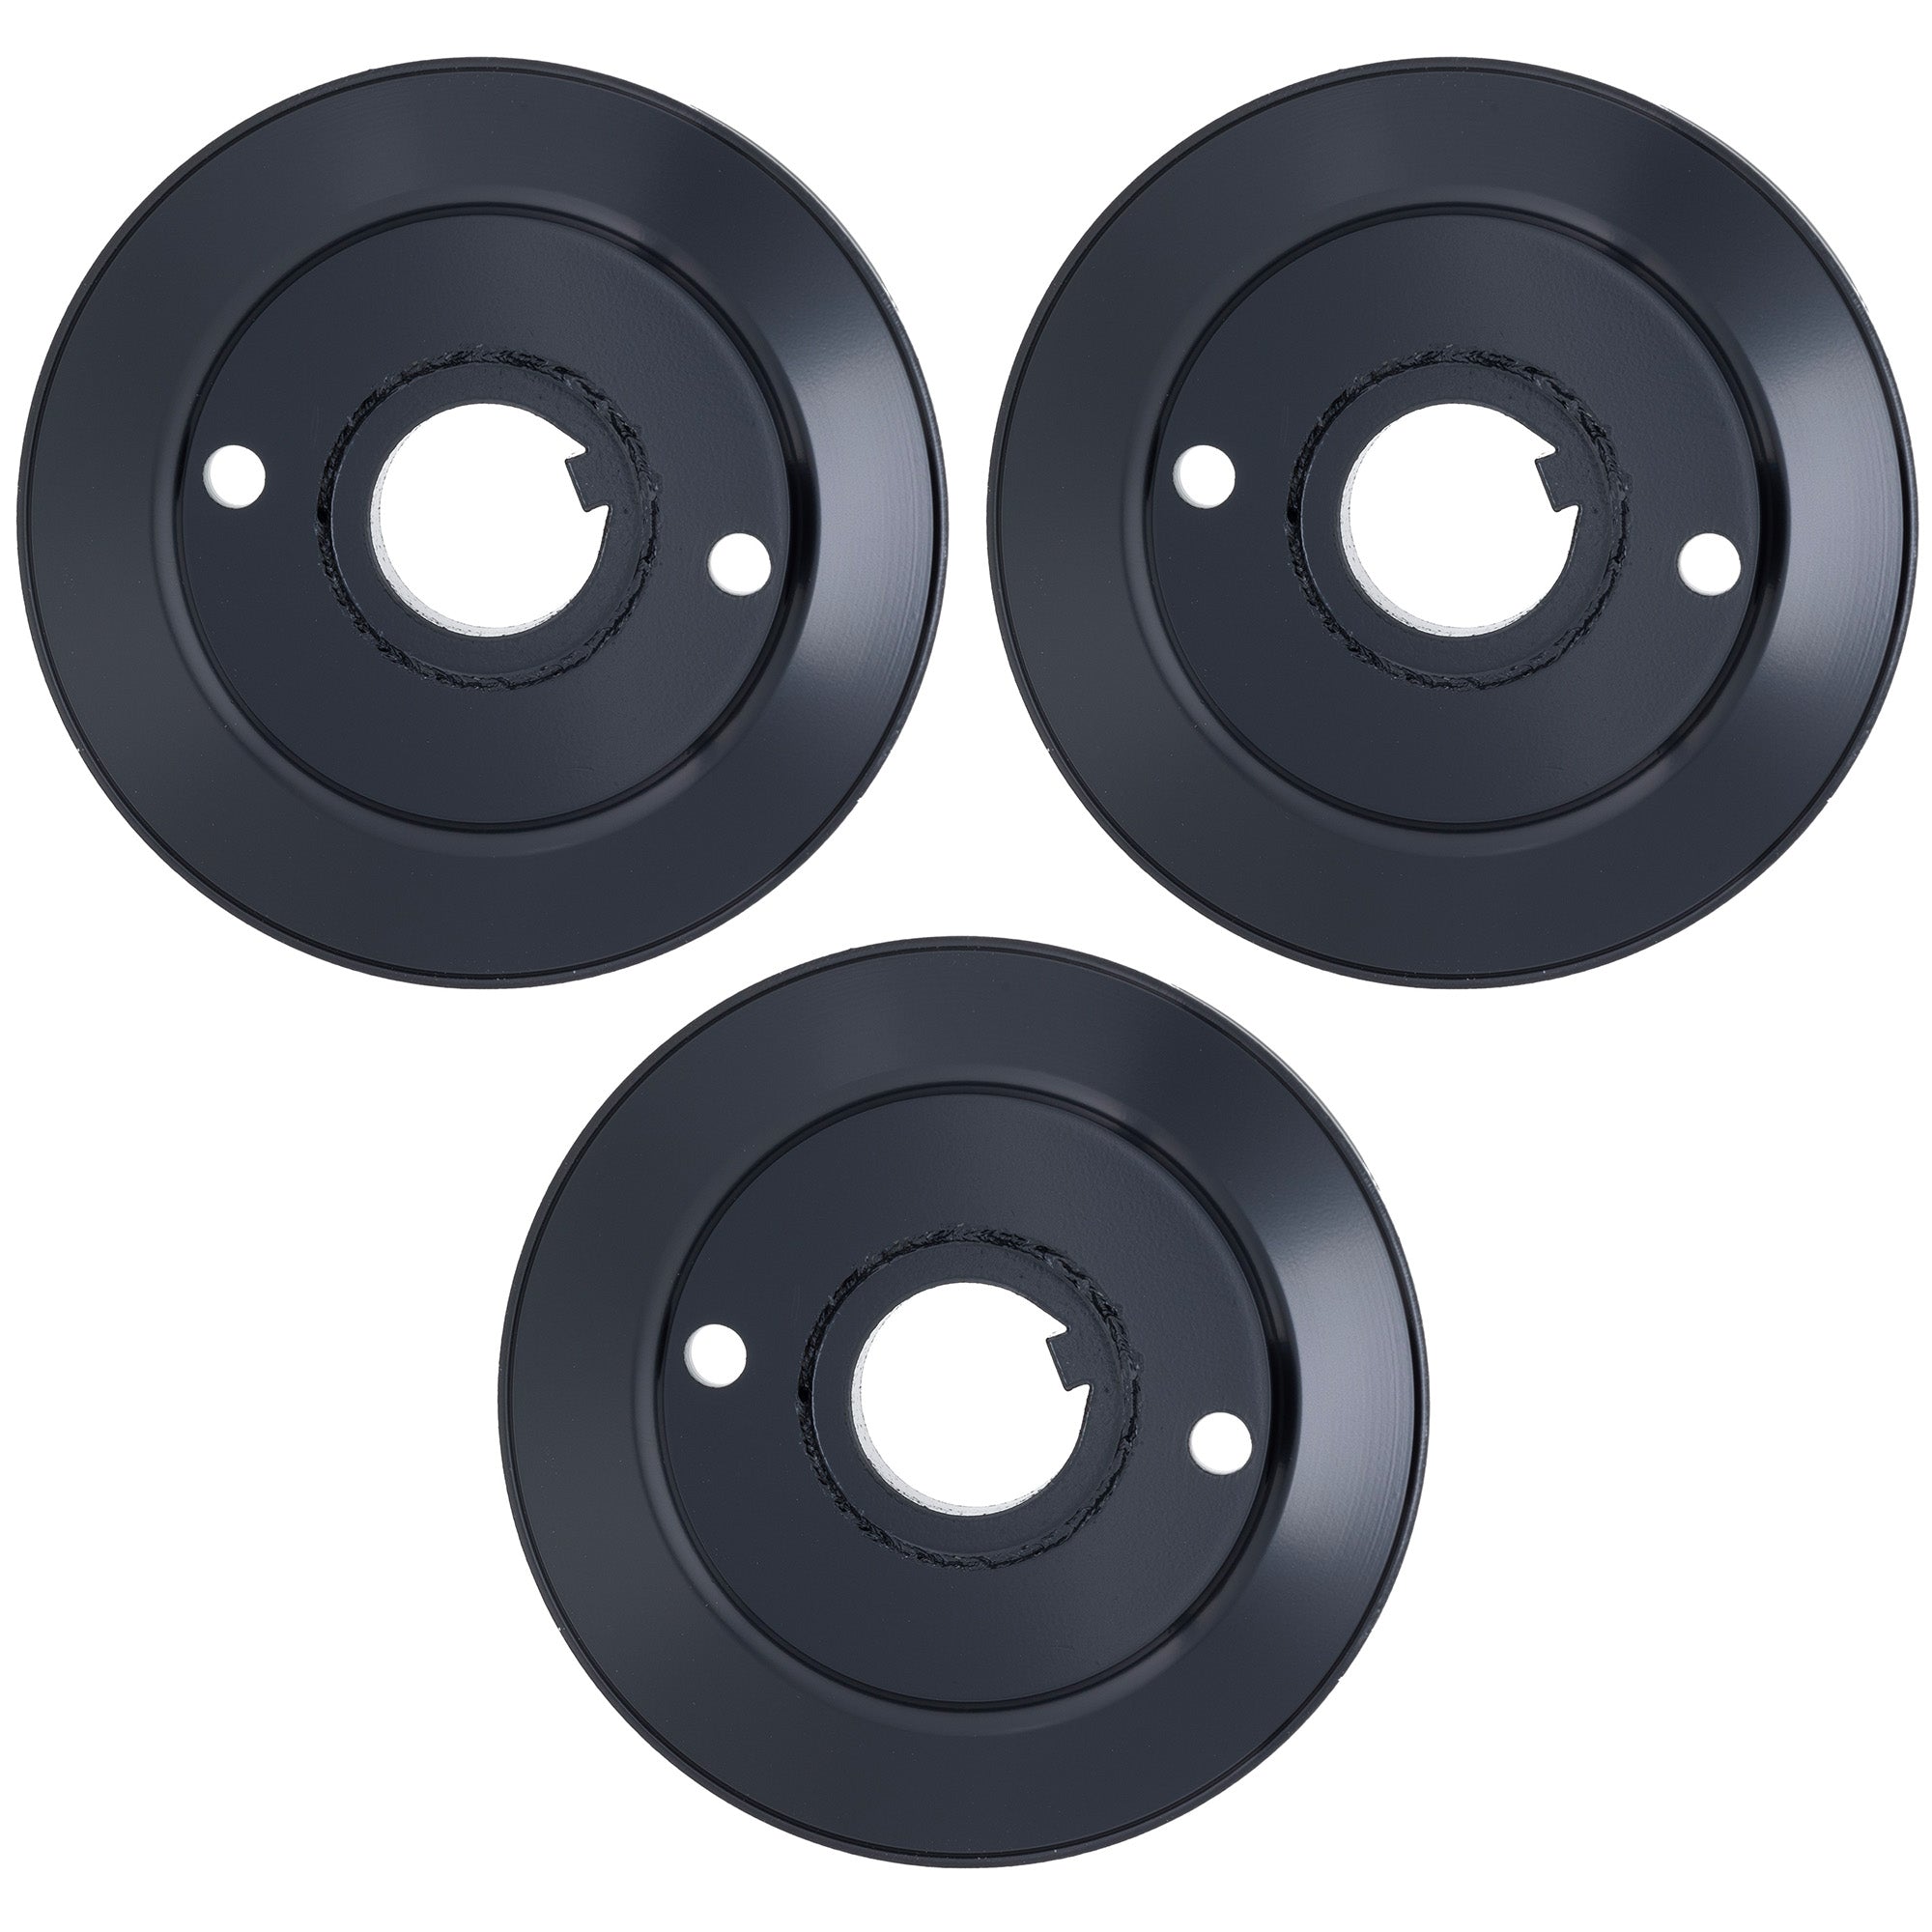 Blade Spindle Belt Pulley Deck Kit For Ariens Gravely MK1010085